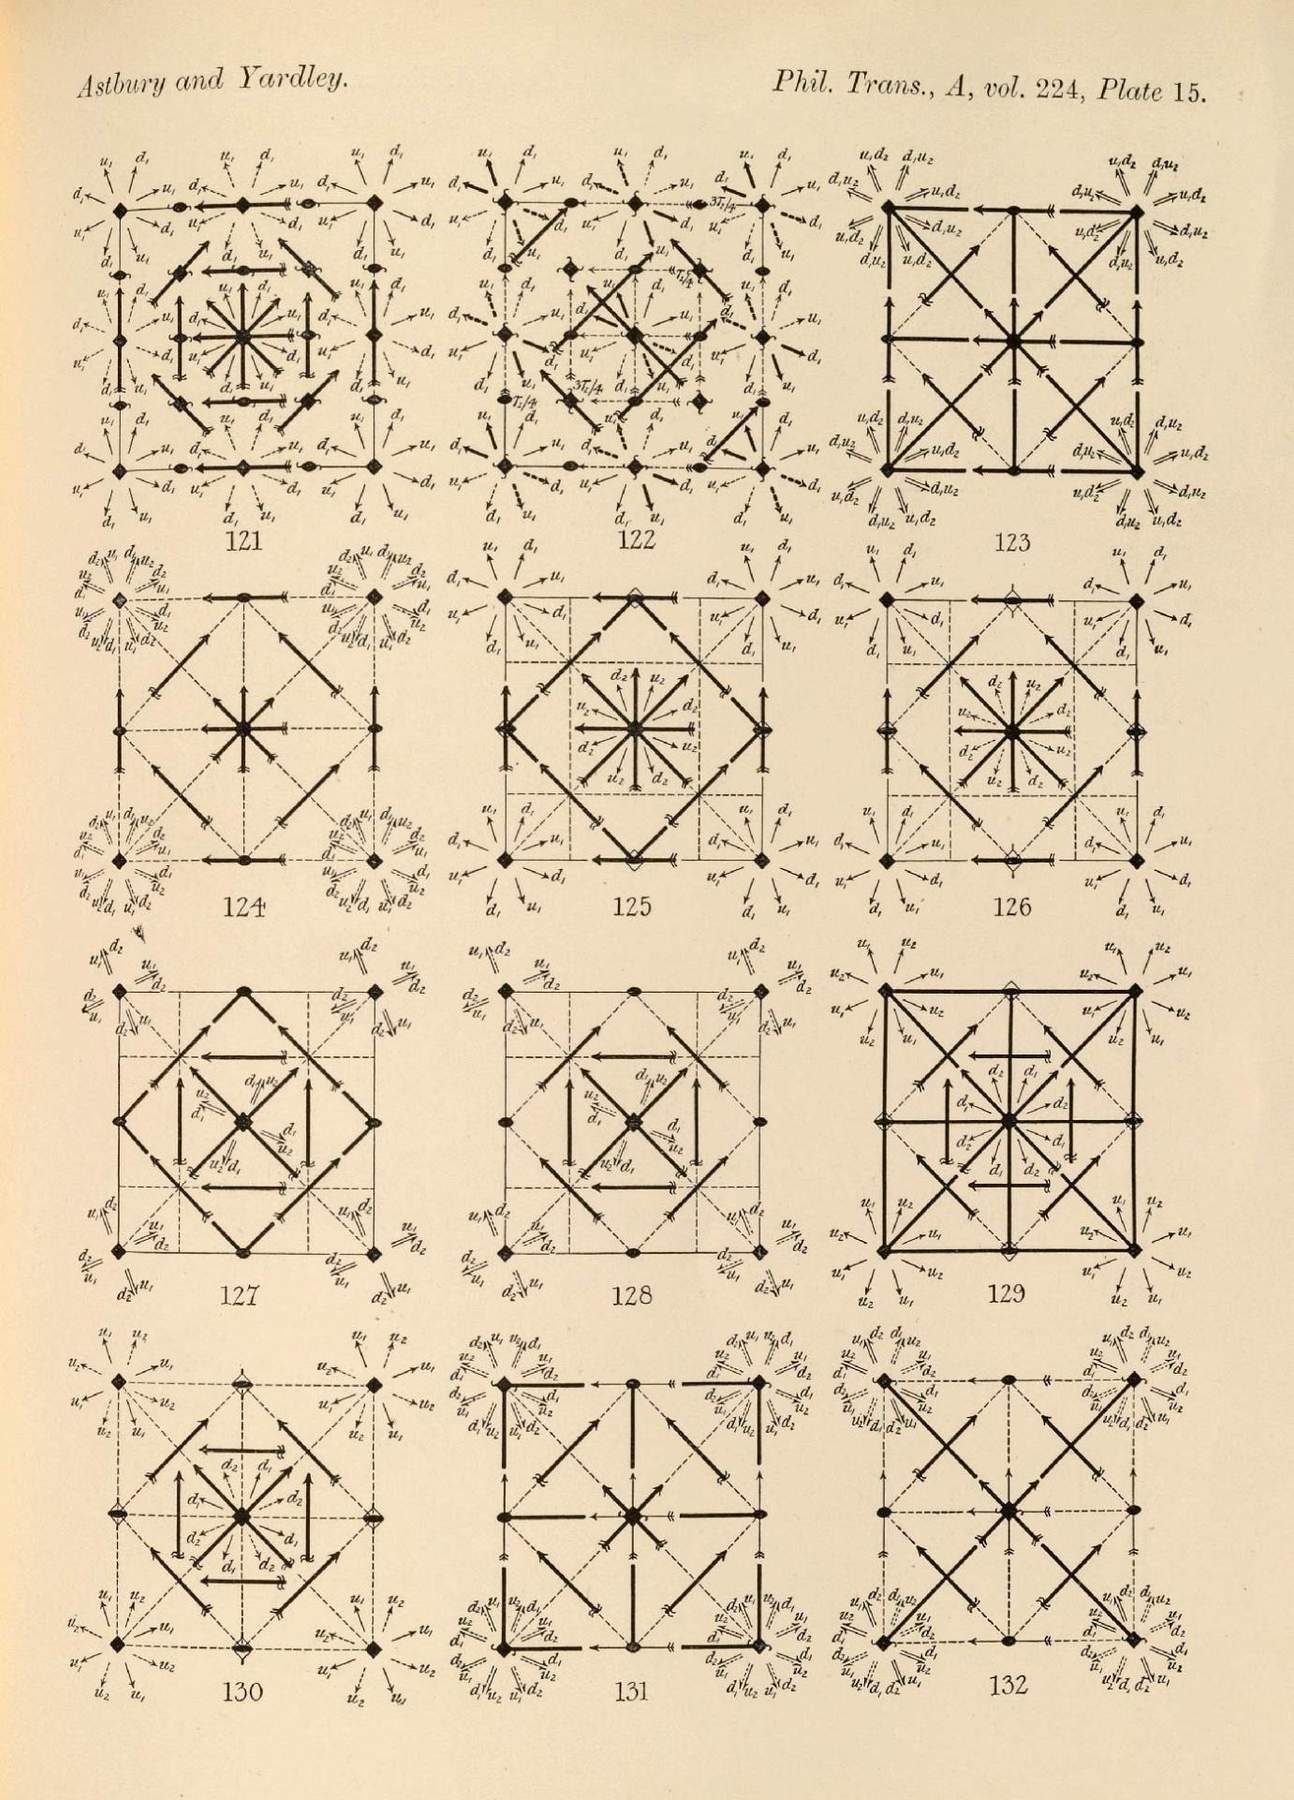 Figures from WILLIAM T. ASTBURY (1898 - 1961) and KATHLEEN YARDLEY [LONSDALE] (1903 - 1971). Tabulated Data for the Examination of the 230 Space-Groups by Homogeneous X-Rays. (Philosophical Transactions of the Royal Society of London, 1924, A224, 221-257).